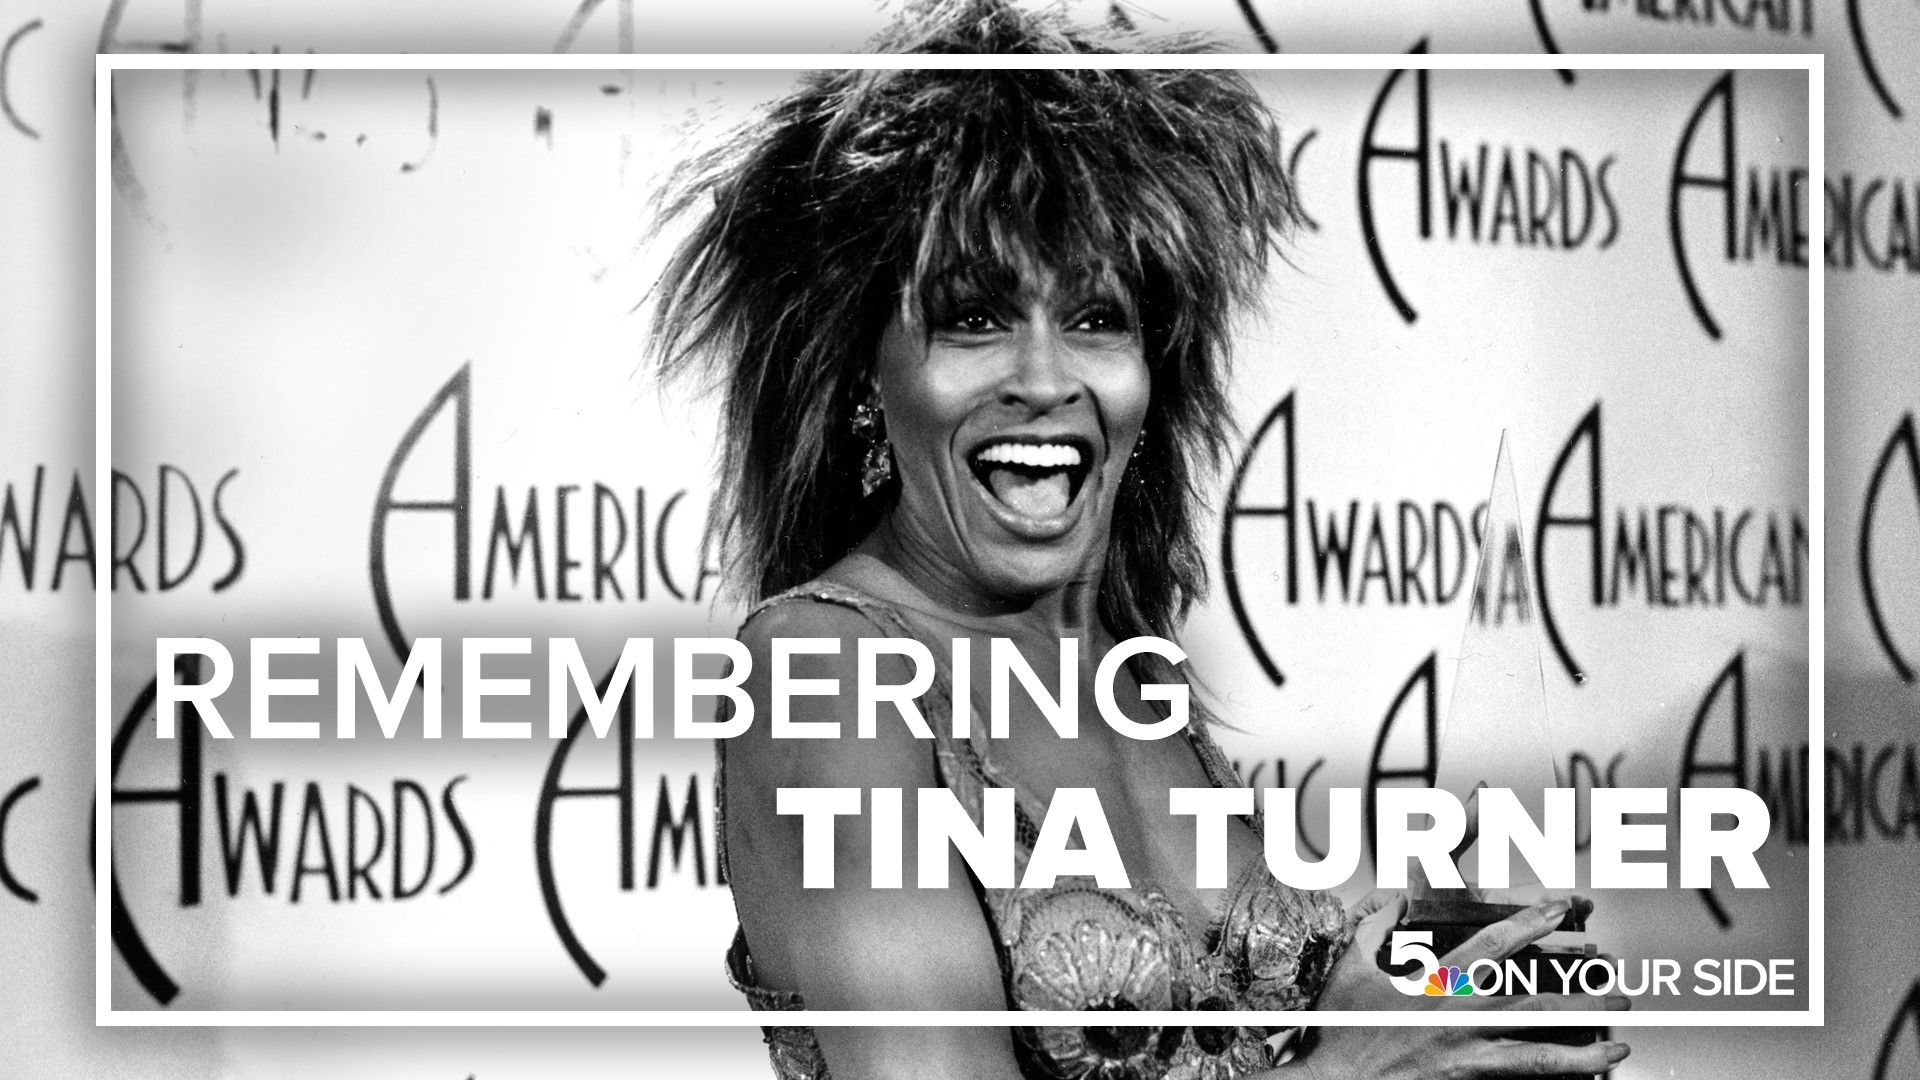 Tina Turner, the unstoppable singer and stage performer dubbed the Queen of Rock 'n' Roll, has died at 83. Turner died Tuesday, after a long illness in her home.